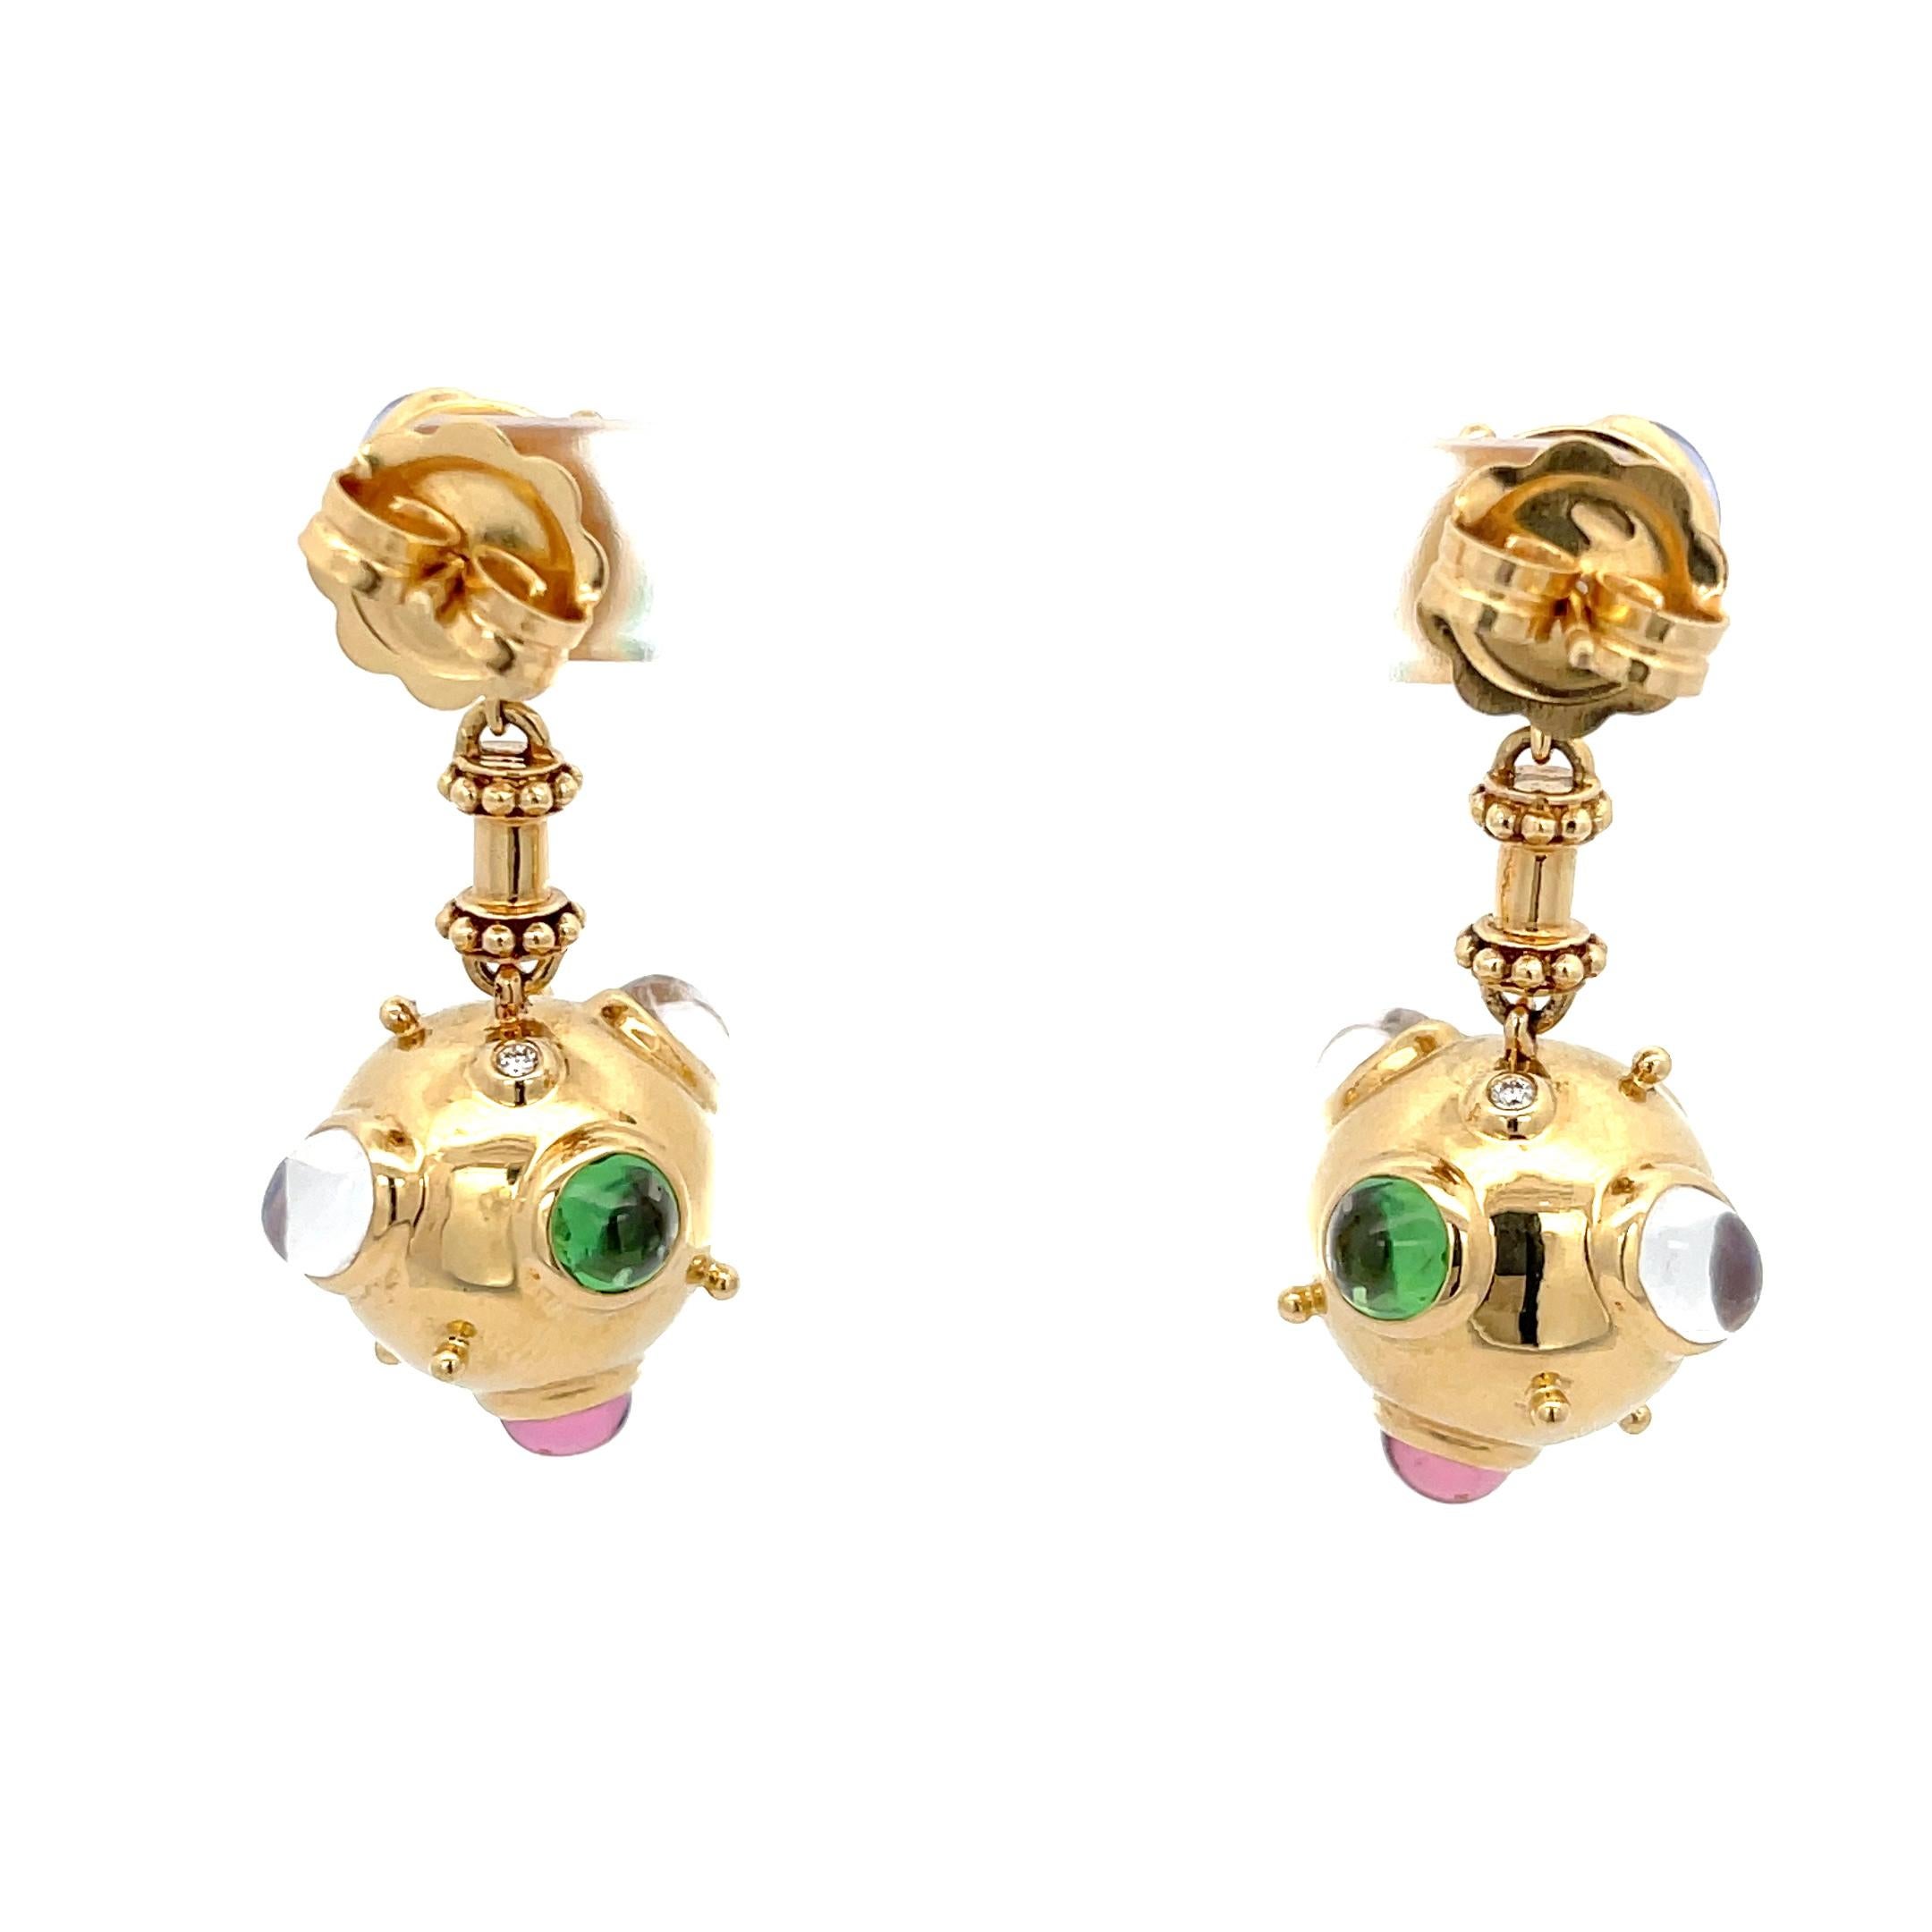 Temple St. Clair Drop Earrings featuring Diamonds and  Cabochon Moonstone, Sapphire, Tsavorite.
1.5